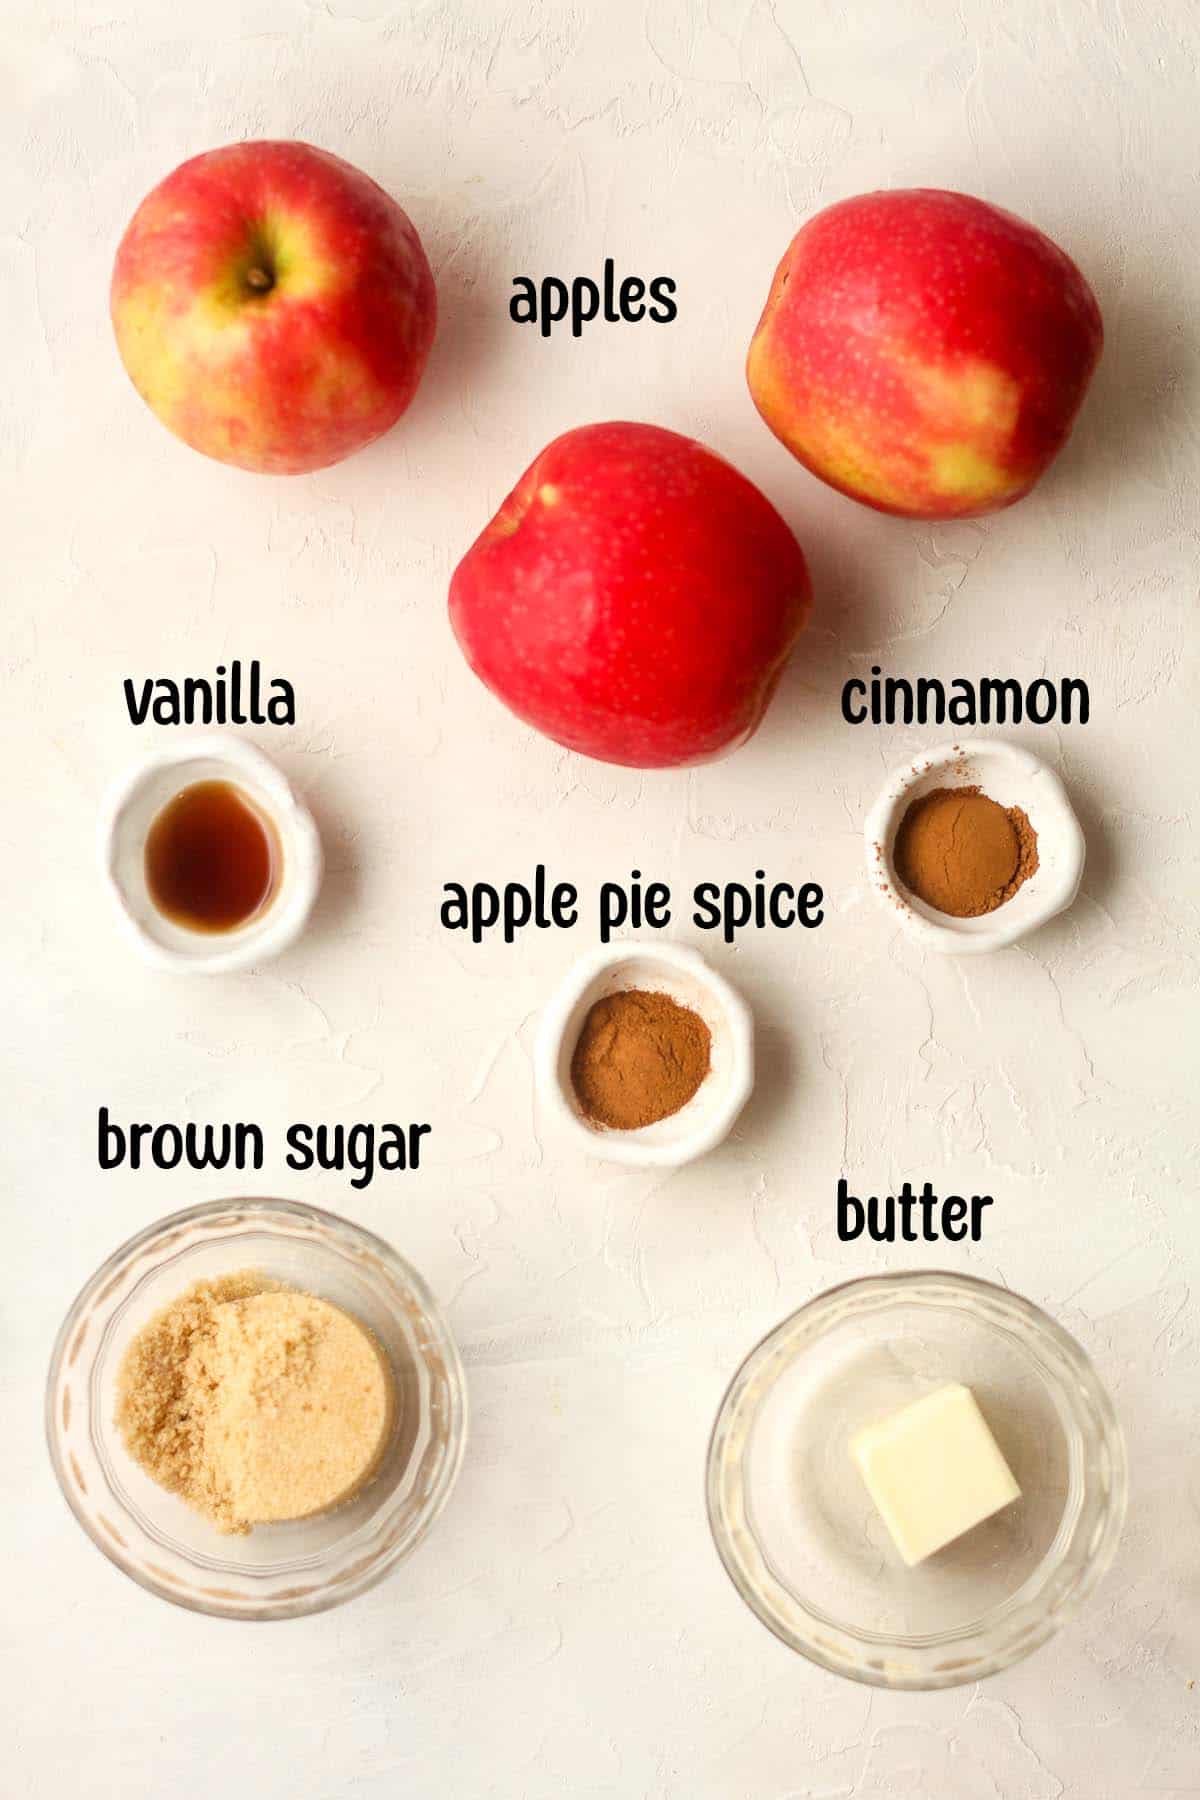 The ingredients for the apple filling, labeled.